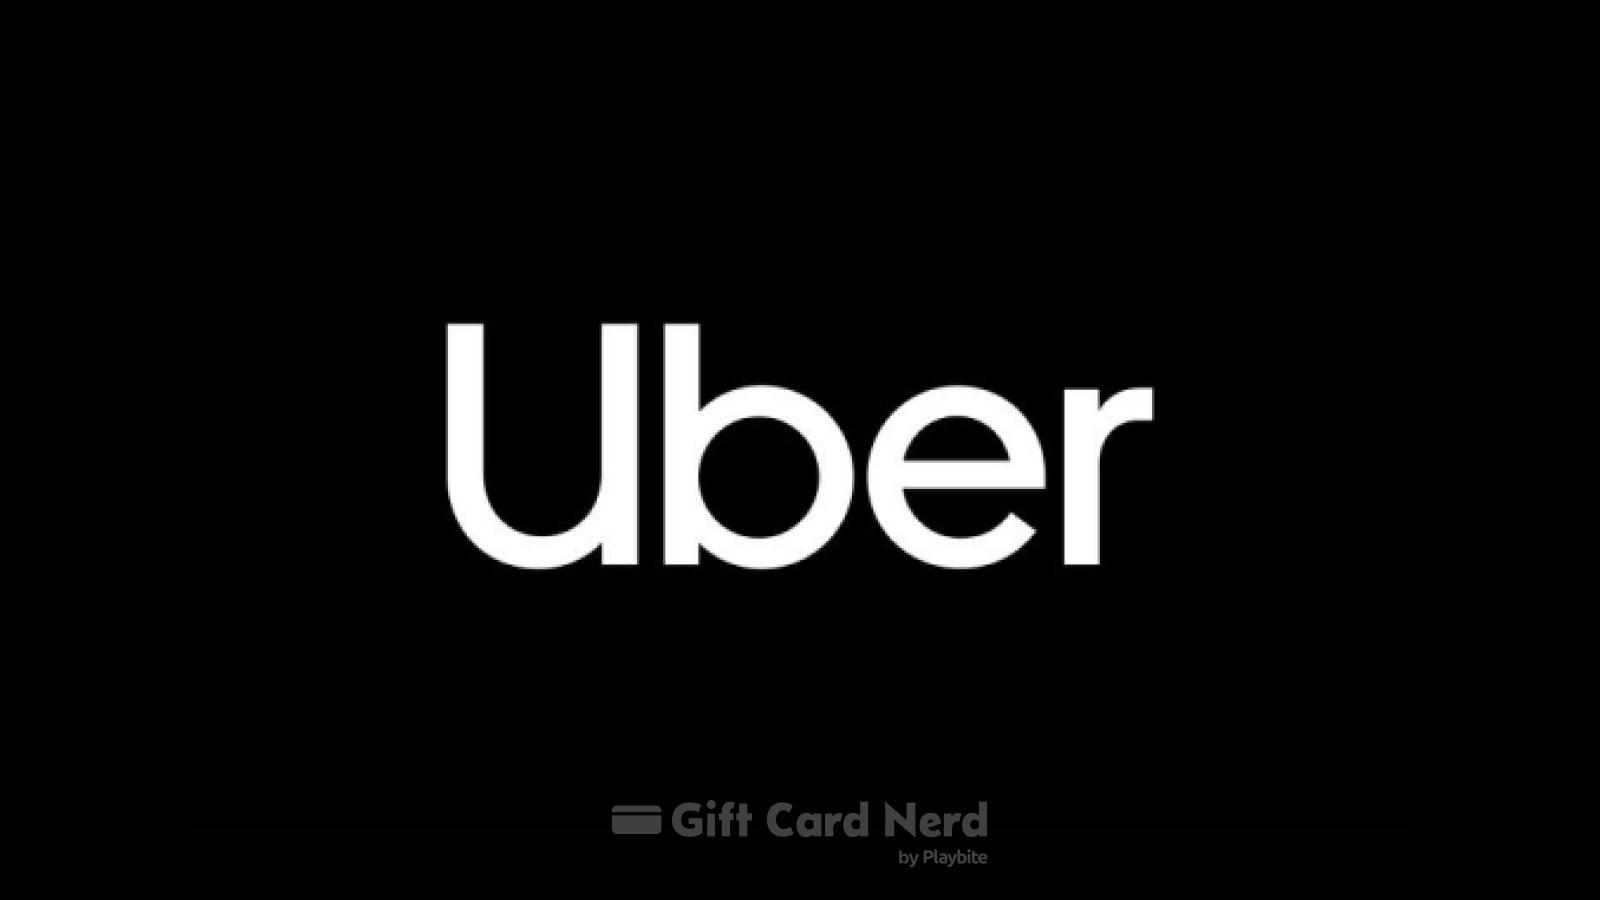 Can I Use an Uber Gift Card on Roblox?